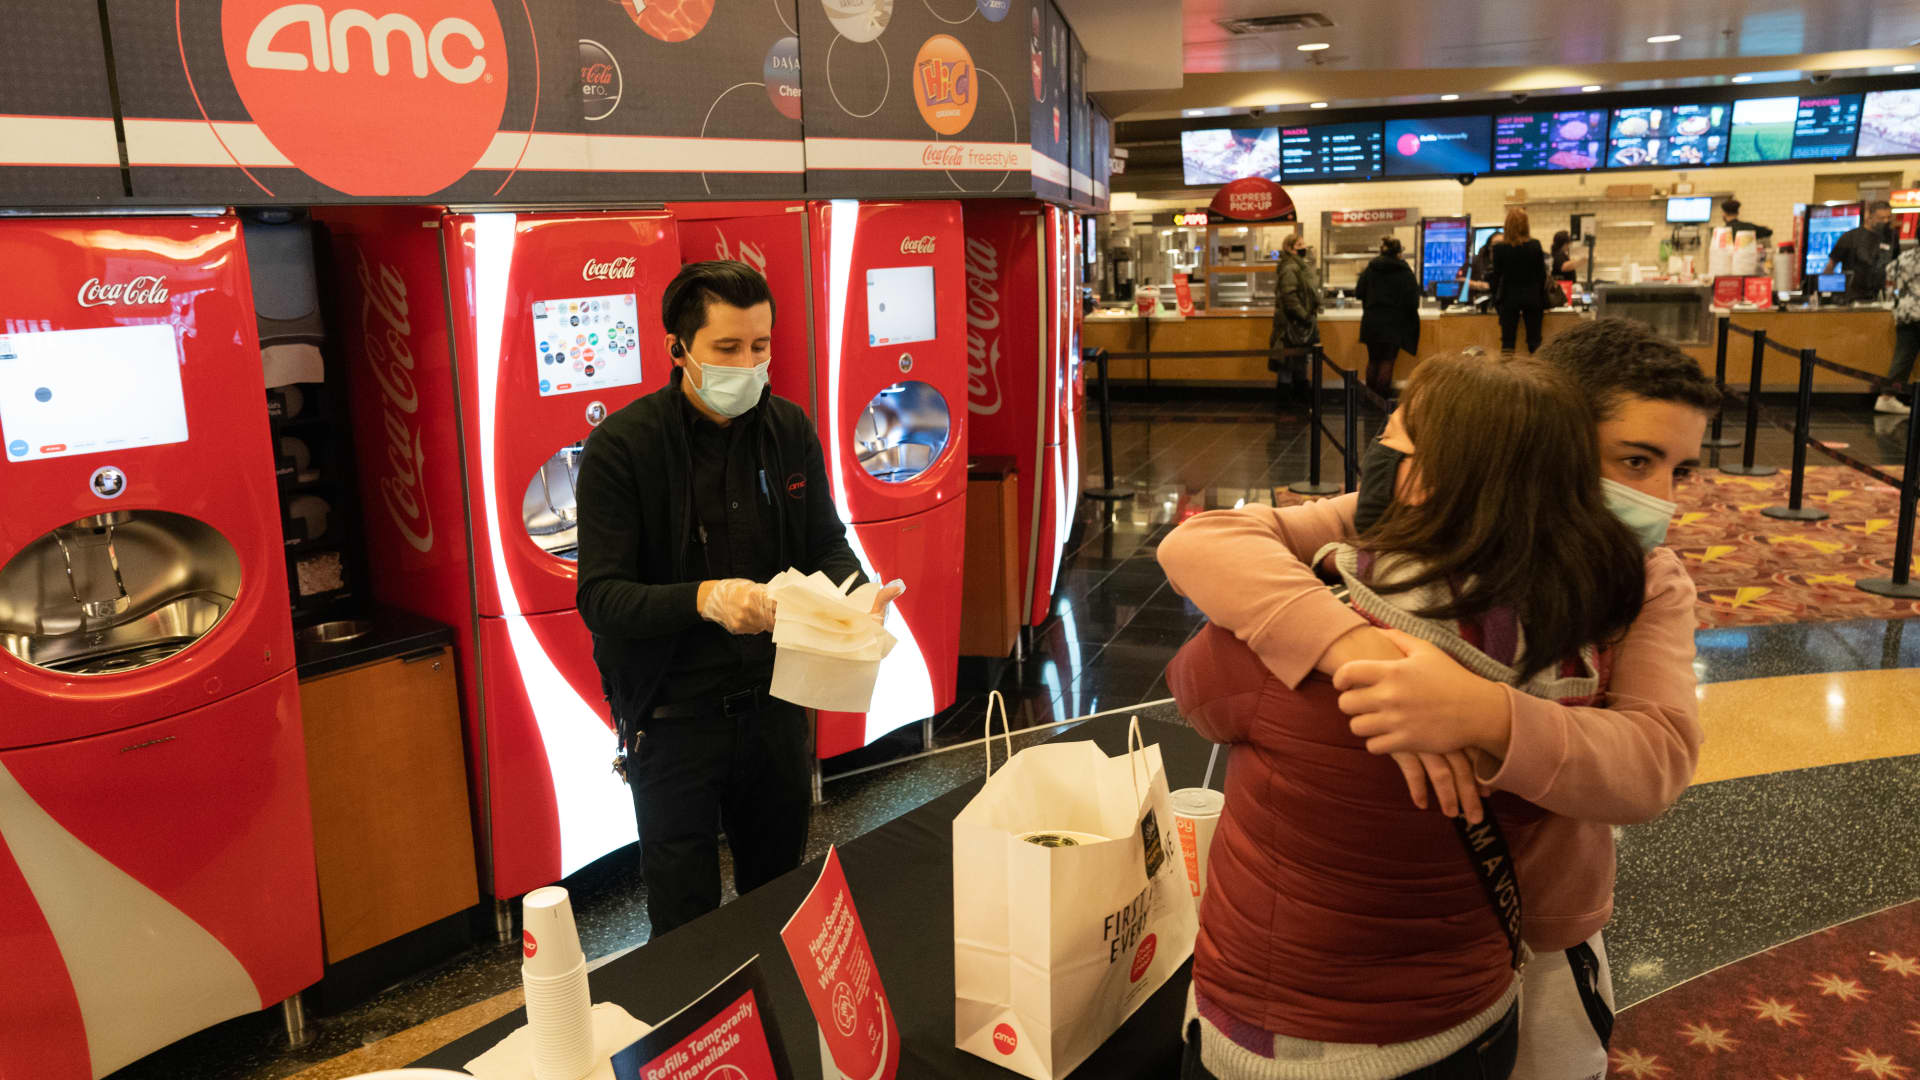 A son hugs his mother as a concessions worker hands over napkins and soda inside the AMC movie theater at the Westfield Century City shopping mall in Los Angeles, California, on Monday, March 15, 2021.